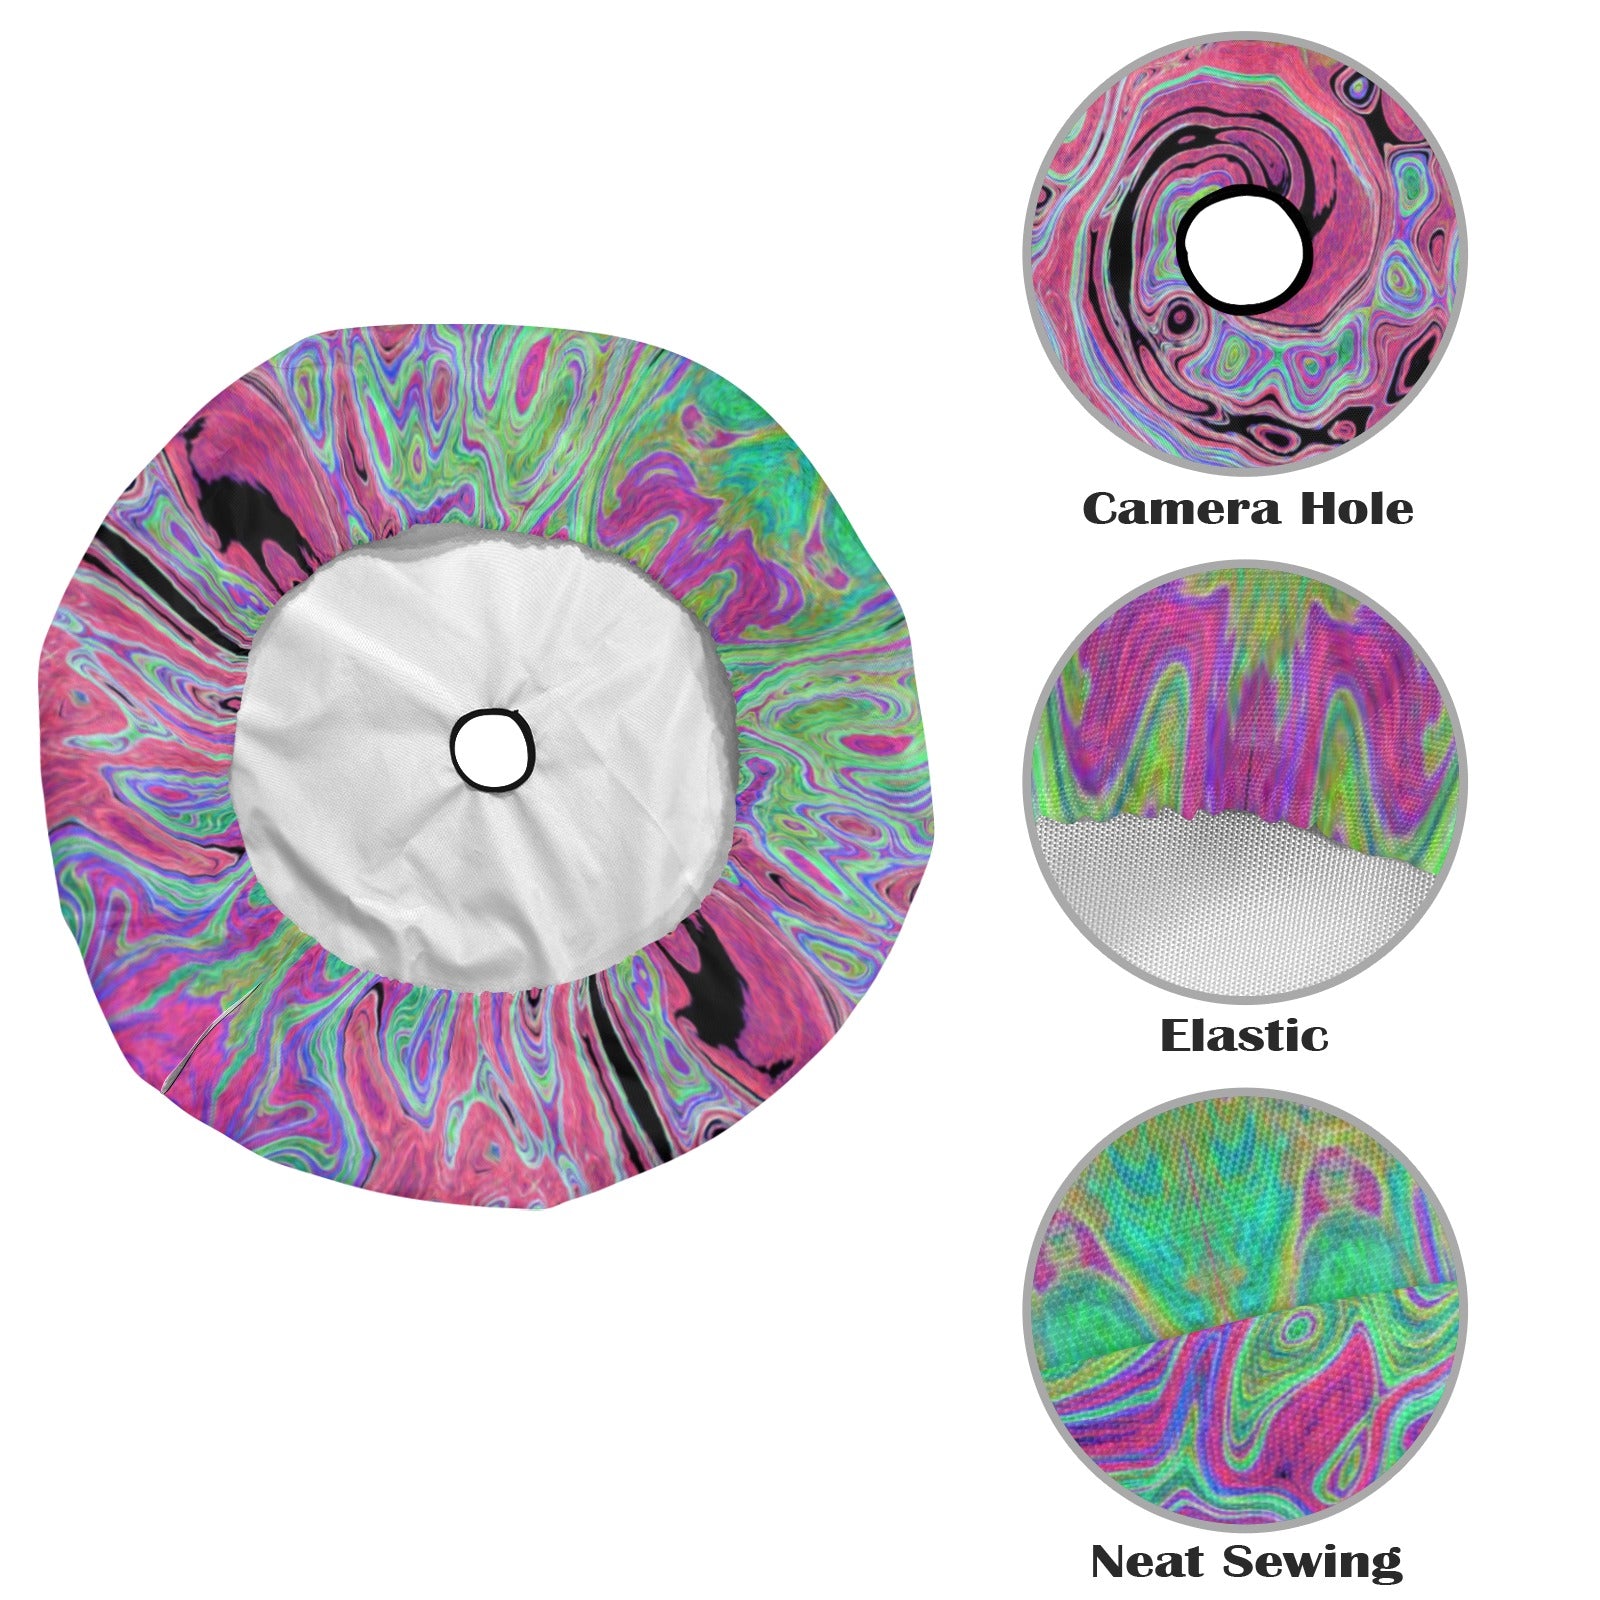 Spare Tire Cover with Backup Camera Hole - Pink and Lime Green Groovy Abstract Retro Swirl - Small